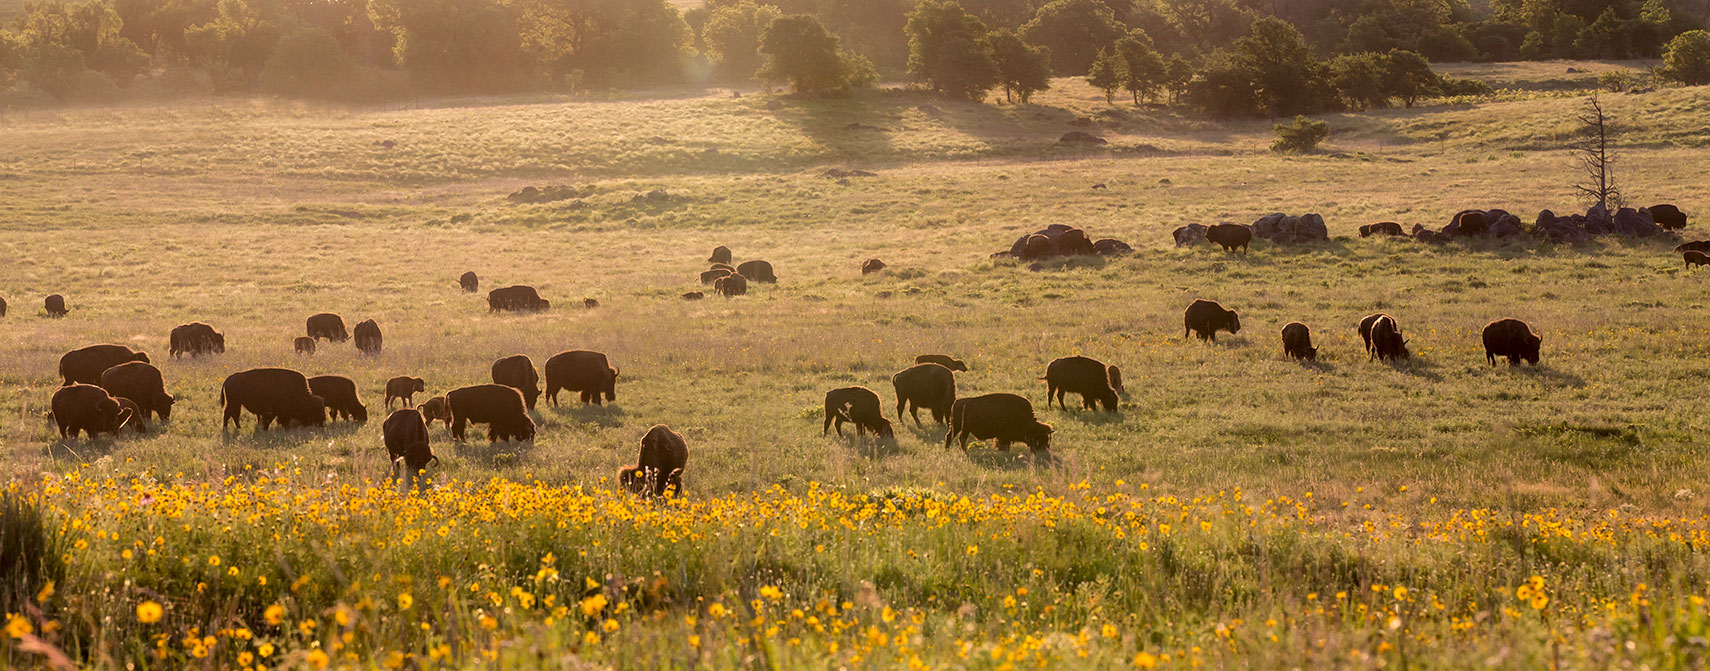 Bison in the Wichita Mountains Wildlife Refuge in Oklahoma